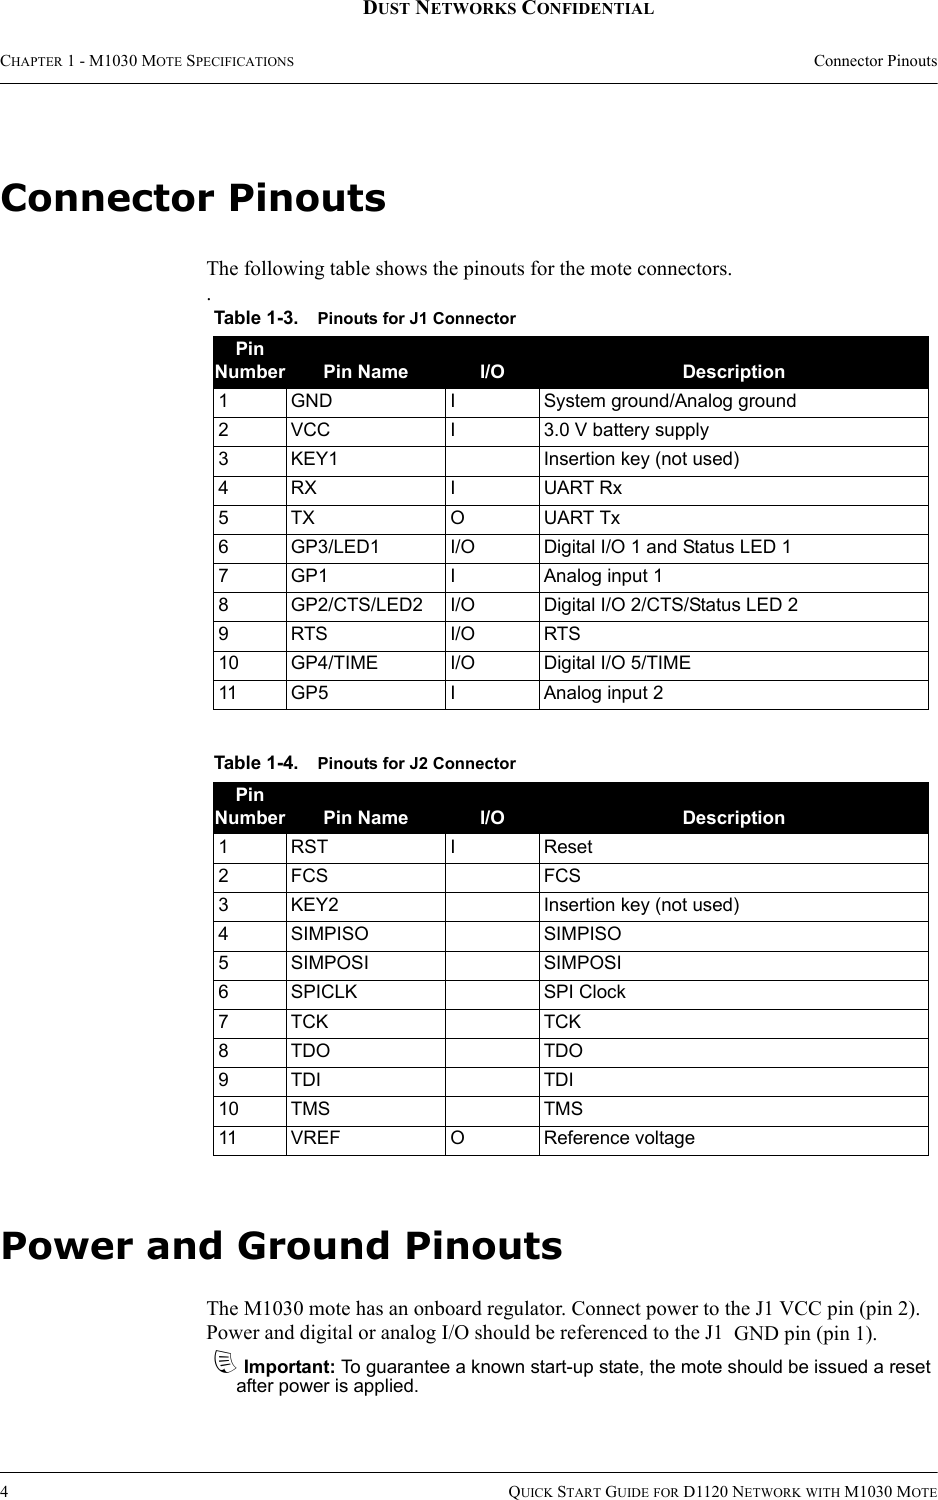 CHAPTER 1 - M1030 MOTE SPECIFICATIONS Connector Pinouts4QUICK START GUIDE FOR D1120 NETWORK WITH M1030 MOTEDUST NETWORKS CONFIDENTIALConnector PinoutsThe following table shows the pinouts for the mote connectors..Power and Ground PinoutsThe M1030 mote has an onboard regulator. Connect power to the J1 VCC pin (pin 2). Power and digital or analog I/O should be referenced to the J1  GND pin (pin 1).dImportant: To guarantee a known start-up state, the mote should be issued a reset after power is applied.Table 1-3. Pinouts for J1 ConnectorPin Number Pin Name I/O Description1 GND I System ground/Analog ground2VCC I3.0 V battery supply3KEY1 Insertion key (not used)4RX IUART Rx5TX OUART Tx6GP3/LED1 I/O Digital I/O 1 and Status LED 17GP1 IAnalog input 18GP2/CTS/LED2 I/O Digital I/O 2/CTS/Status LED 29RTS I/O RTS10 GP4/TIME I/O Digital I/O 5/TIME11 GP5 I  Analog input 2Table 1-4. Pinouts for J2 ConnectorPin Number Pin Name I/O Description1RST IReset2FCS FCS3KEY2 Insertion key (not used)4SIMPISO SIMPISO5SIMPOSI SIMPOSI6SPICLK SPI Clock7TCK TCK8TDO TDO9TDI TDI10 TMS TMS11 VREF OReference voltage